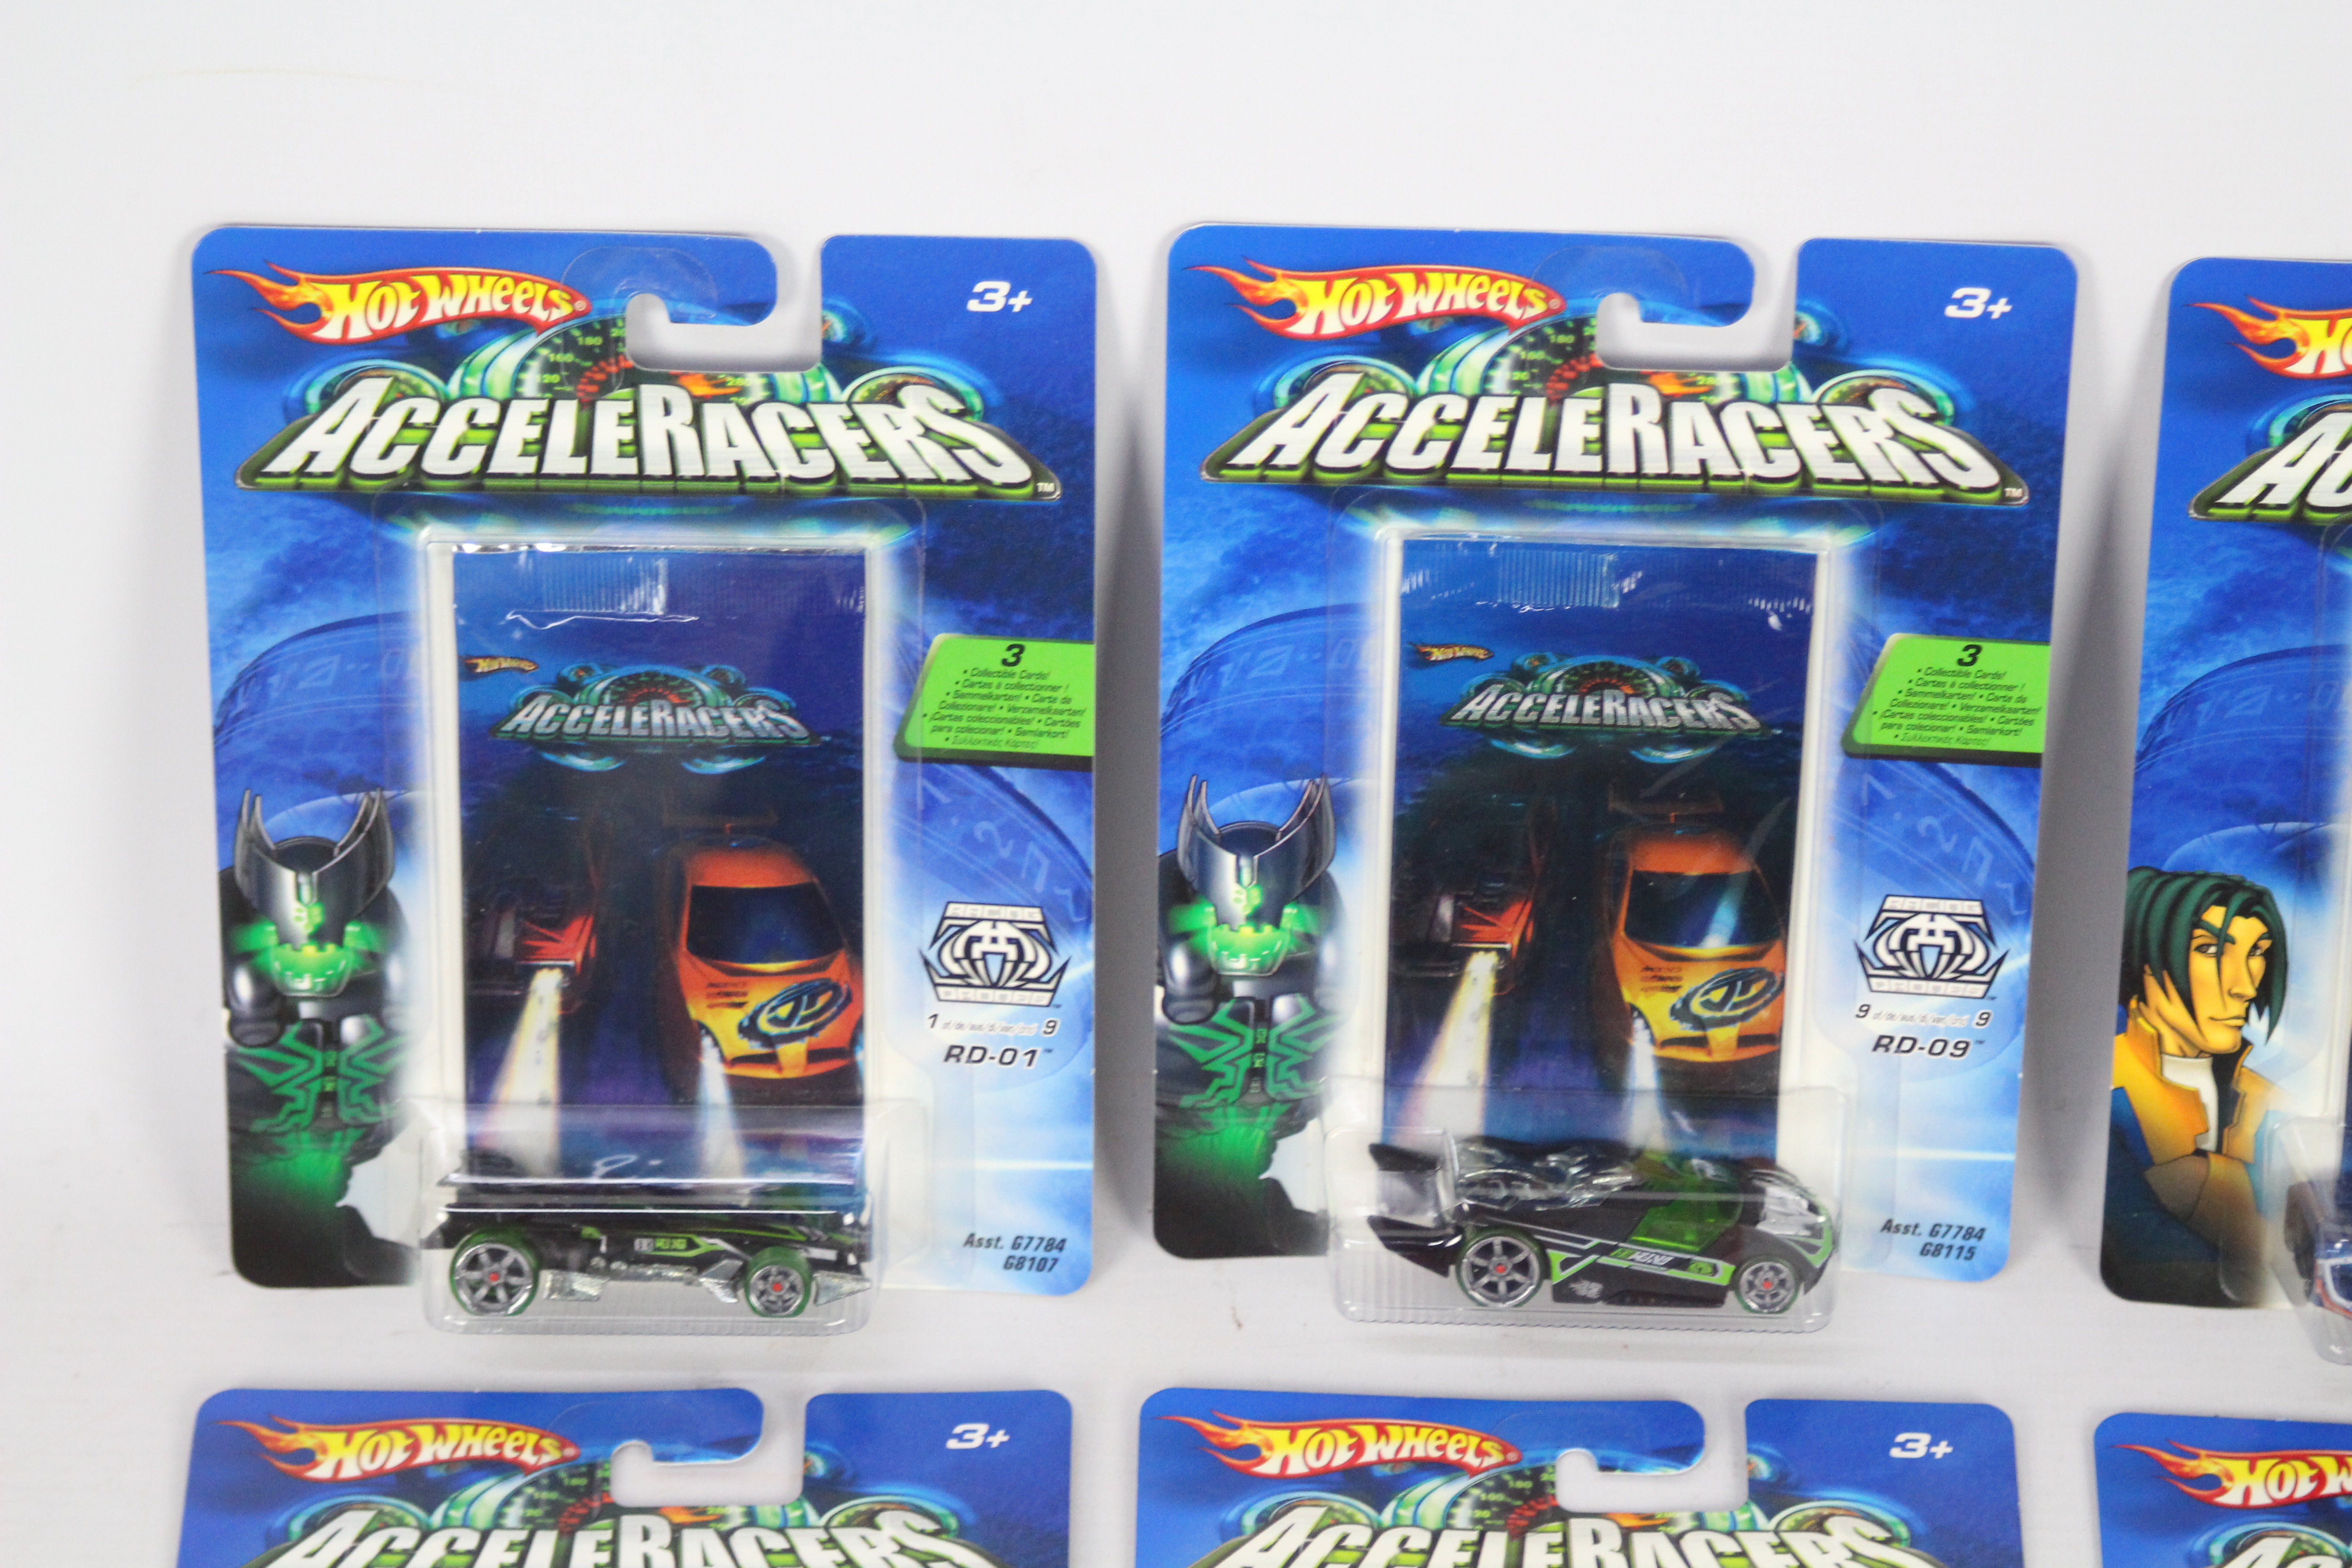 Hot Wheels - Acceleracers - 6 x unopened carded Acceleracers models from the Teku and Racing Drones - Image 2 of 3